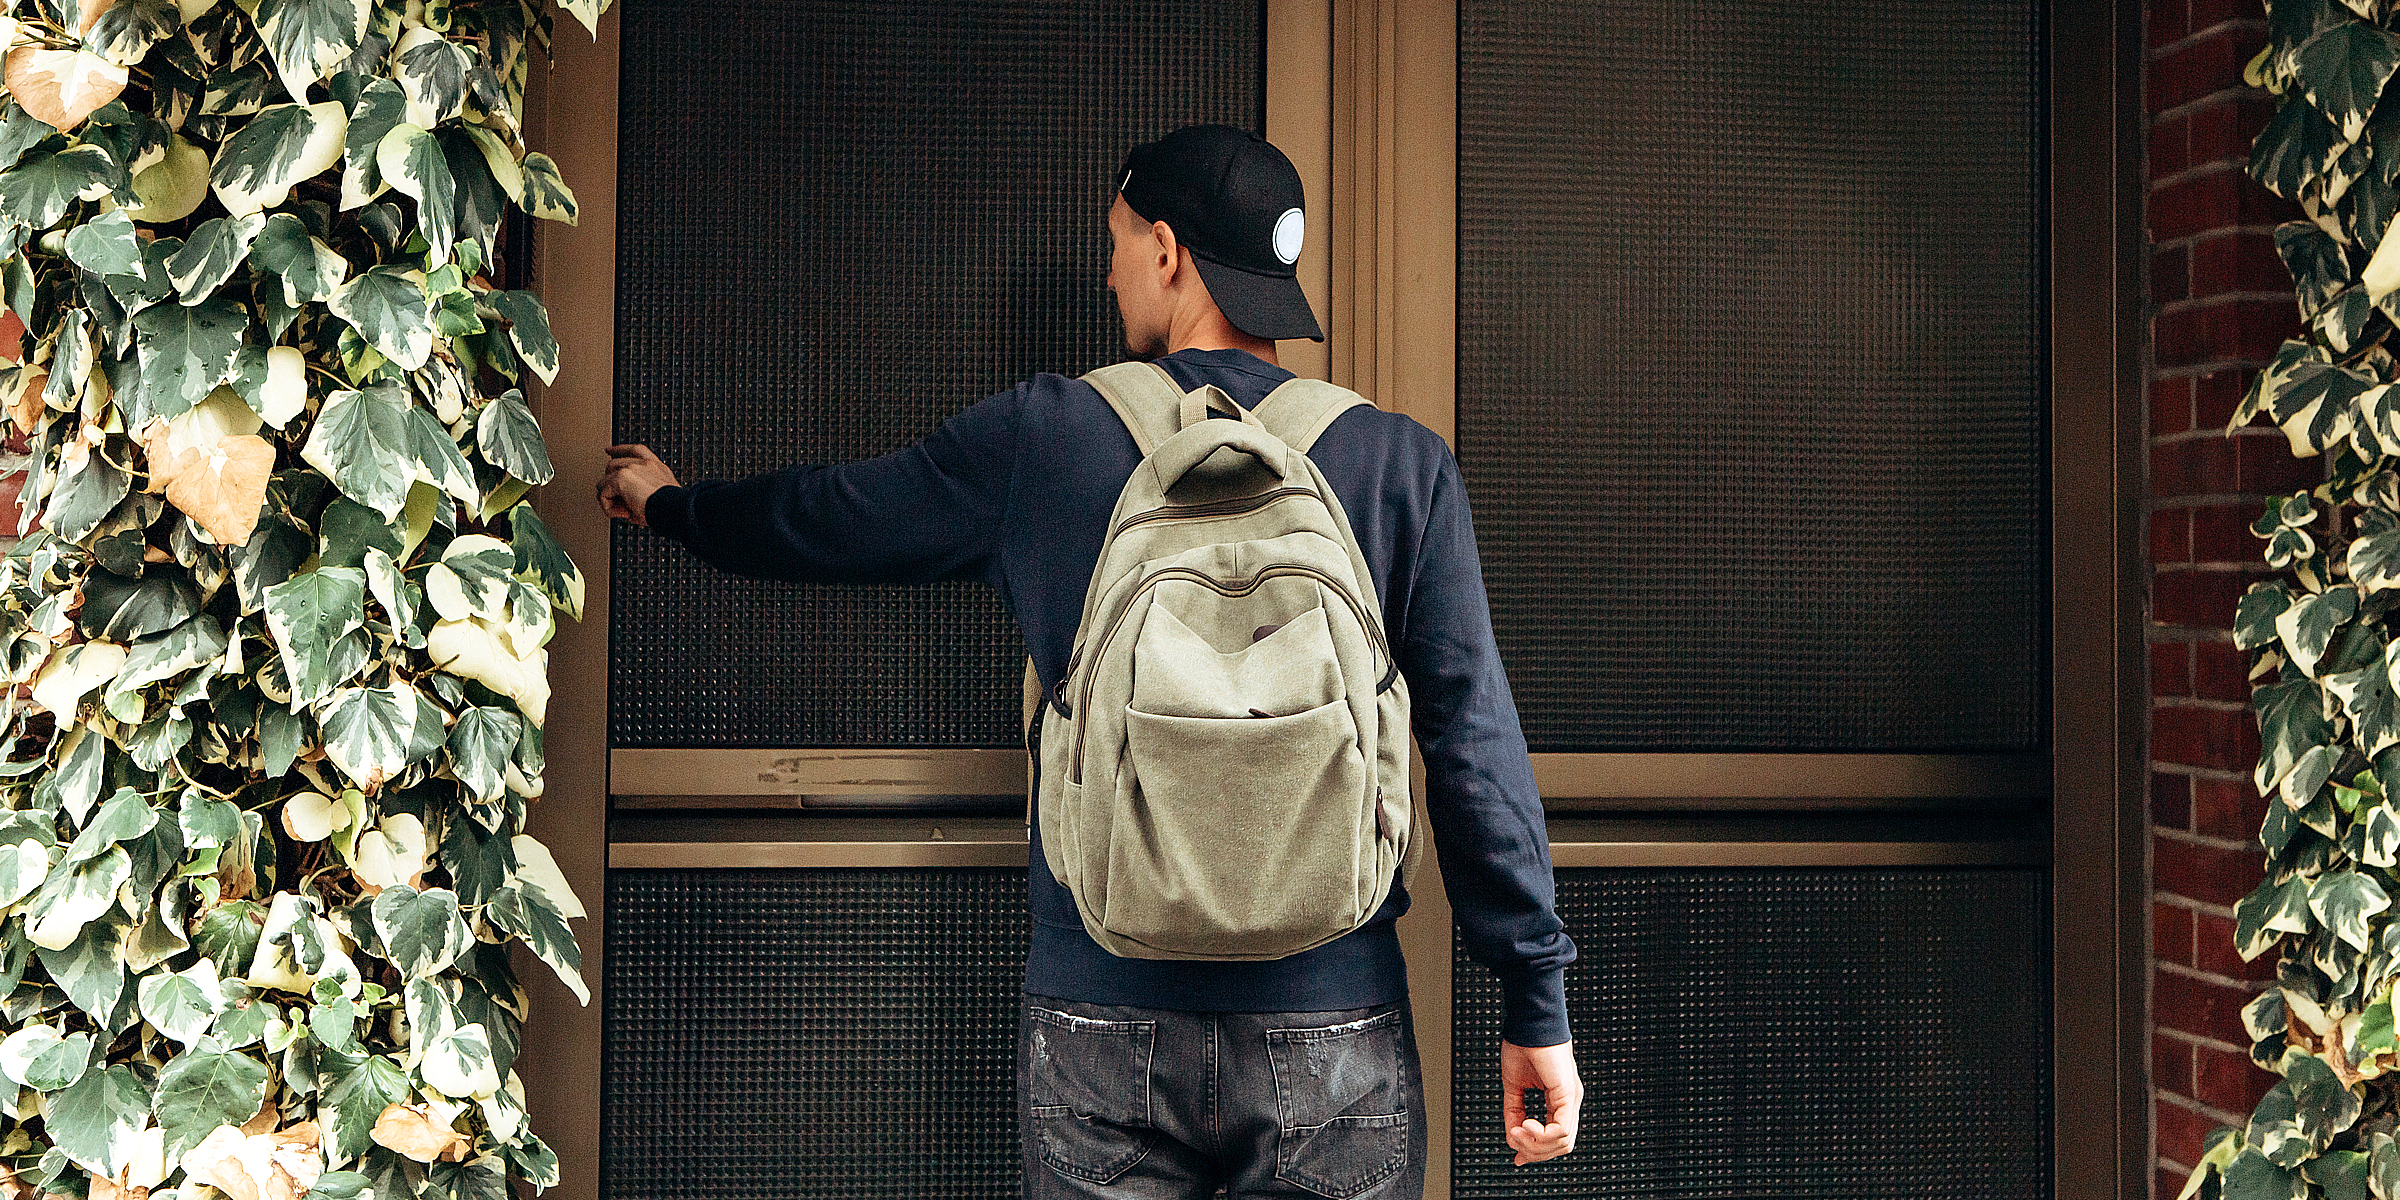 A young man with a backpack knocking on a door | Source: Shutterstock